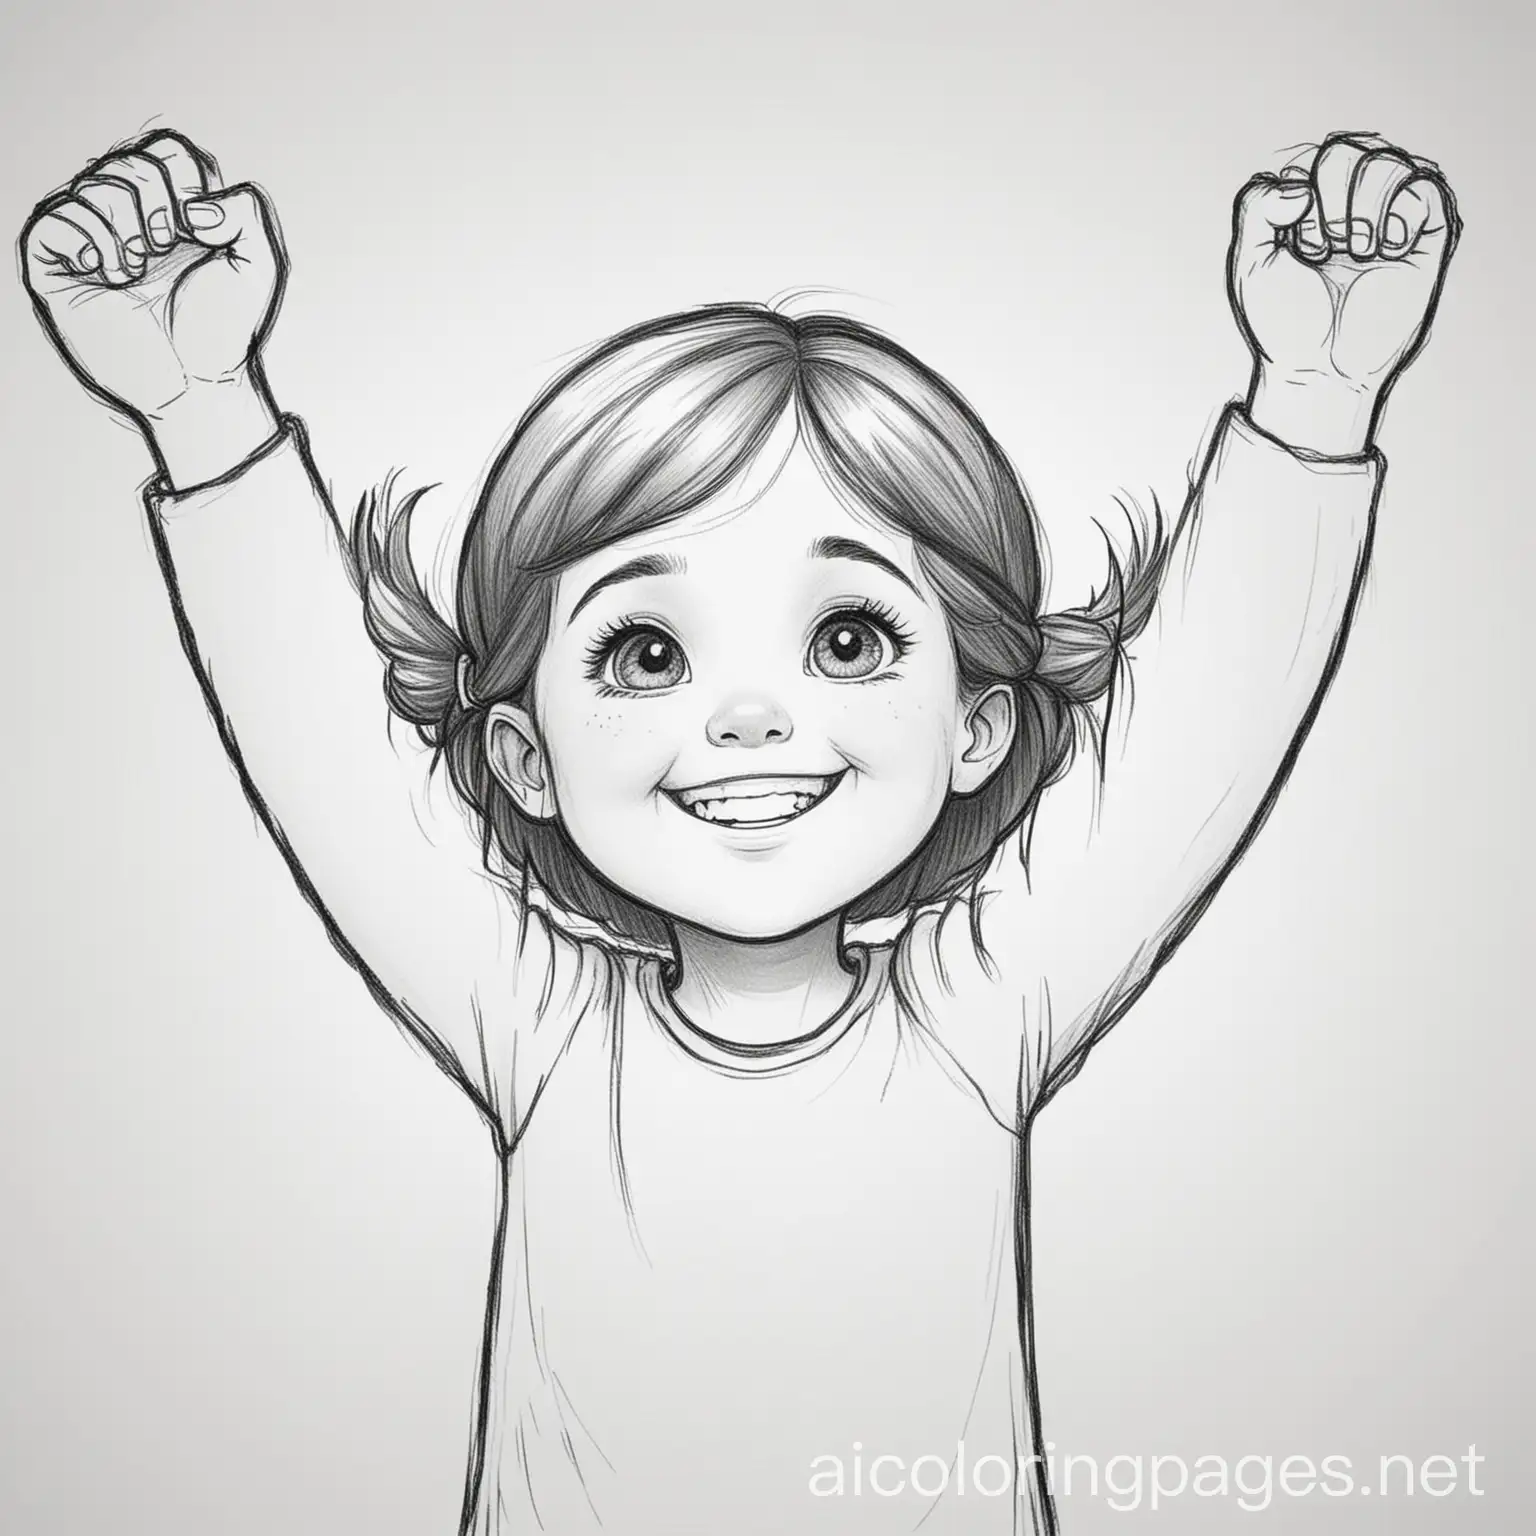 a little girl has her arms lifted up she is smiling and happy, Coloring Page, black and white, line art, white background, Simplicity, Ample White Space